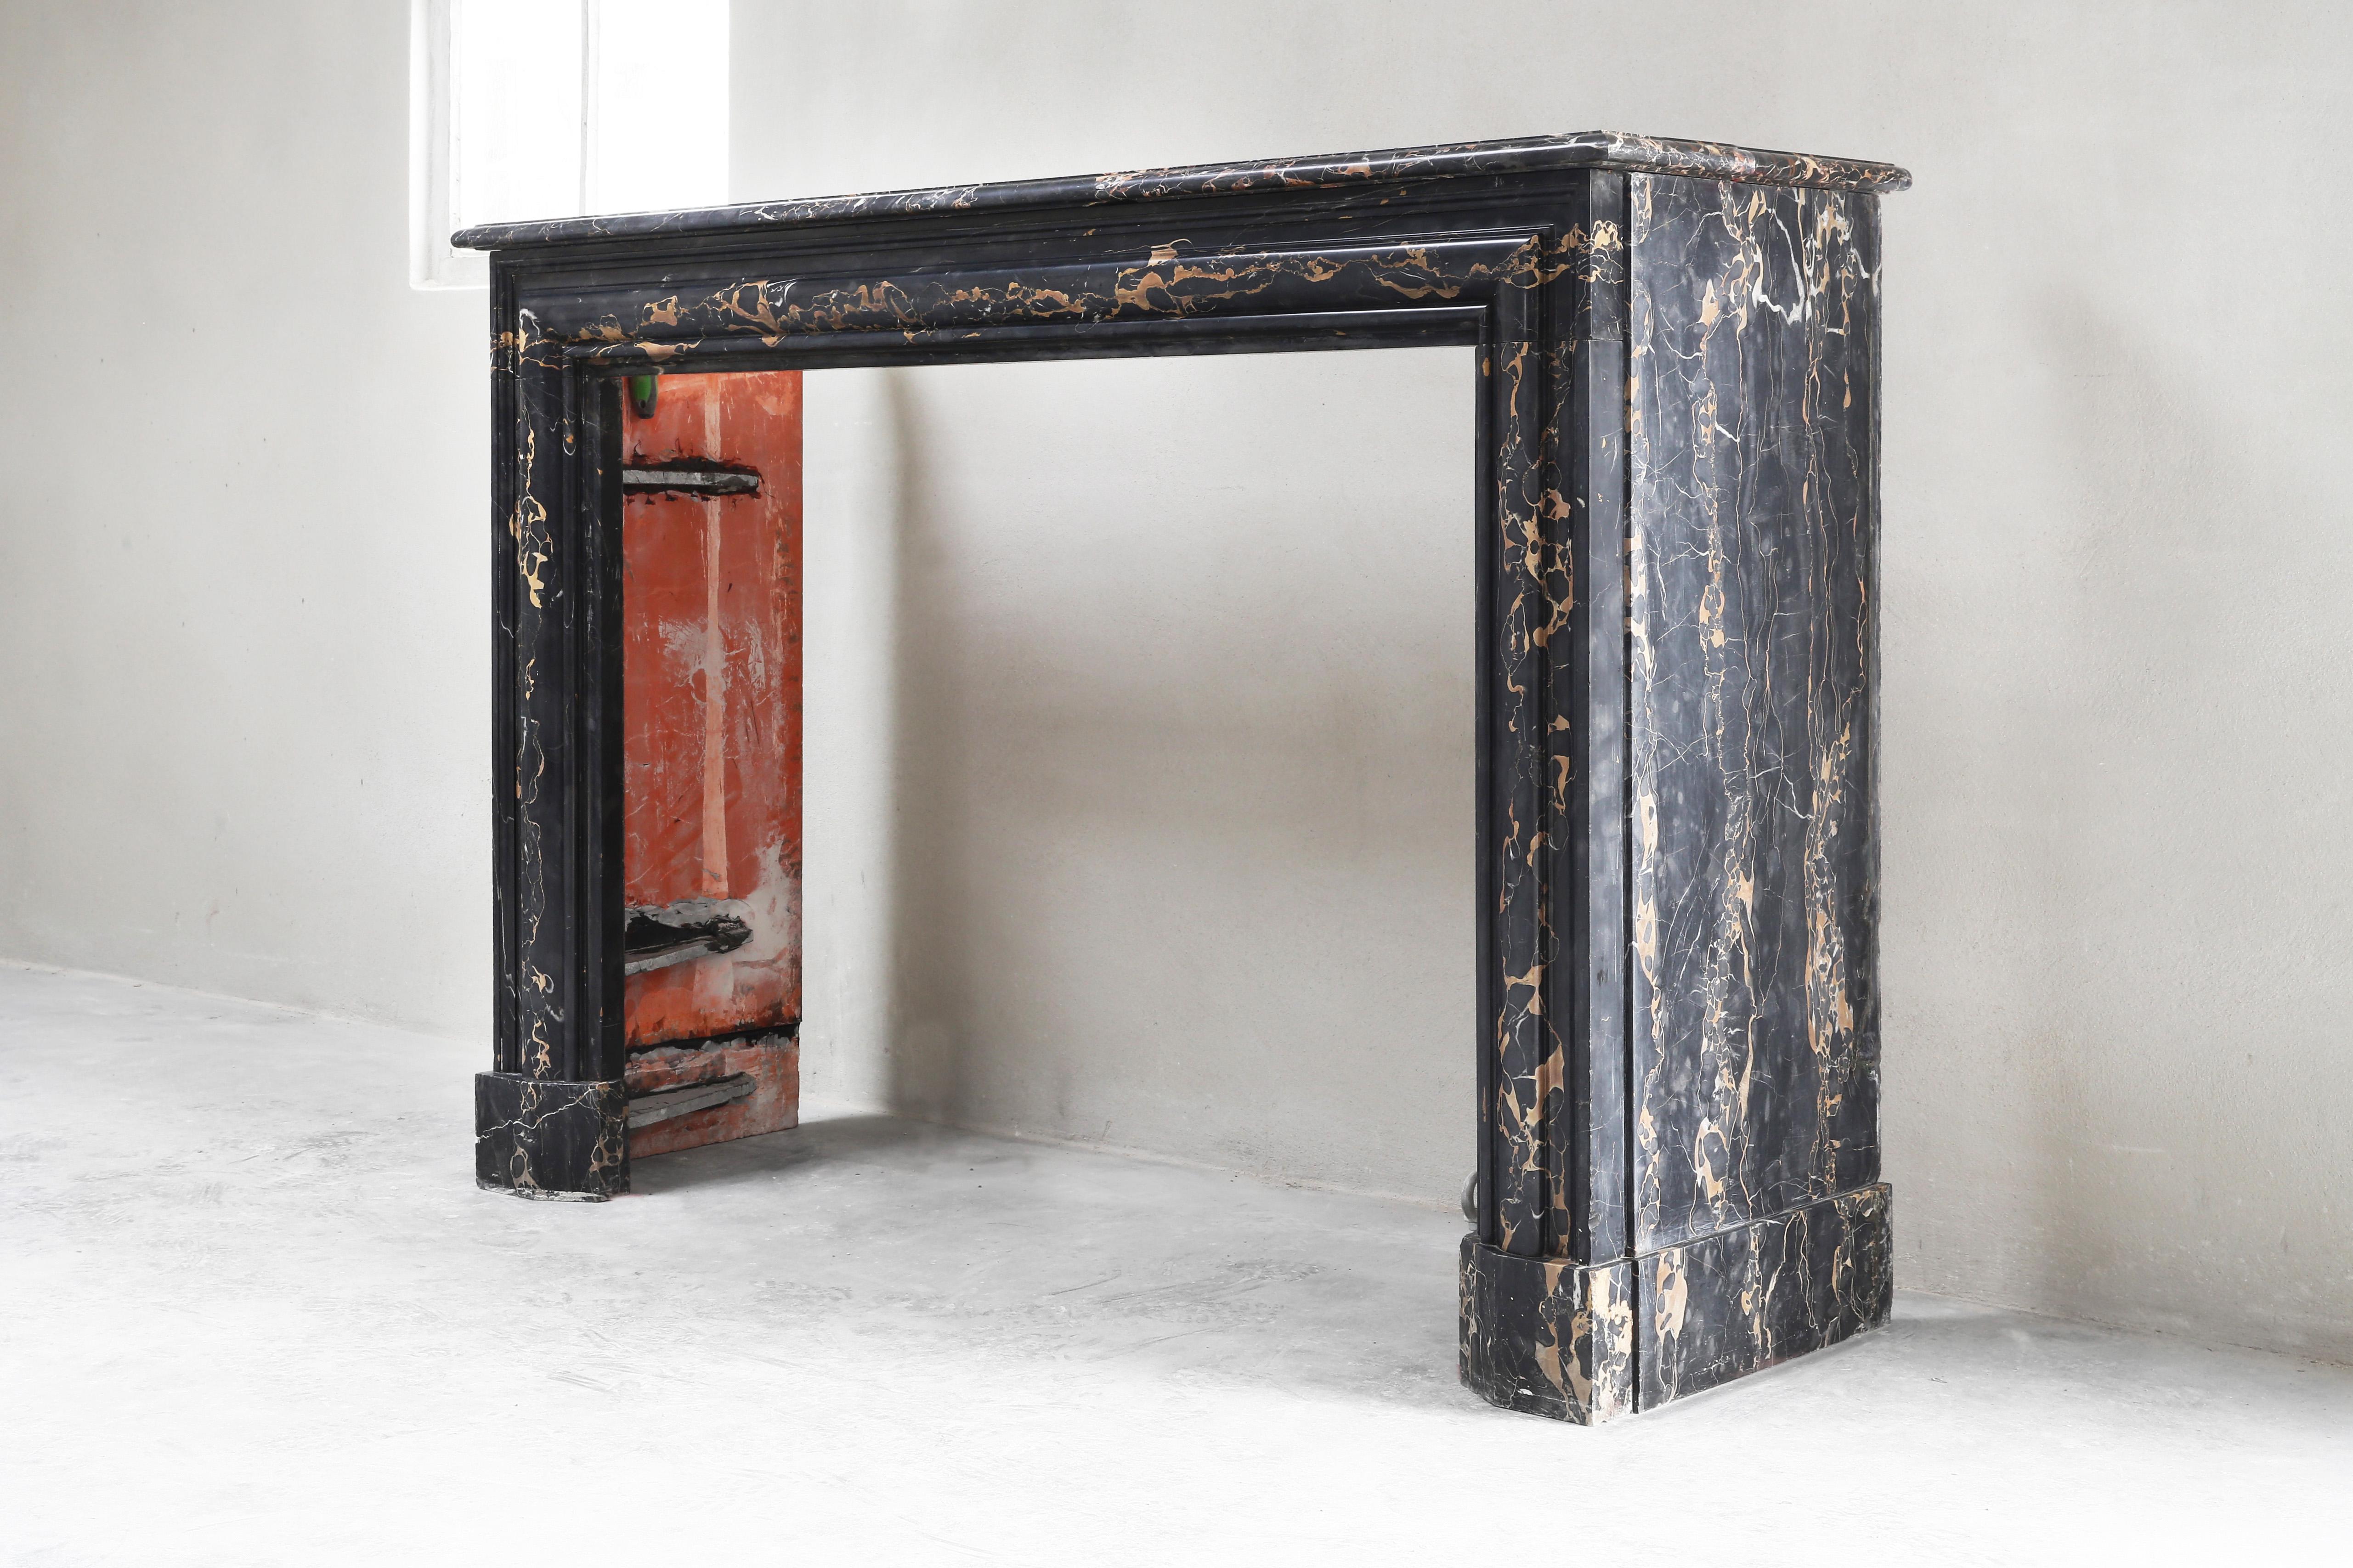 A beautiful antique marble fireplace in the style of Boudain from the 19th century. This type of marble is called Portoro marble and is one of the most elegant Italian types of marble. The black background with golden veins ensures luxury and